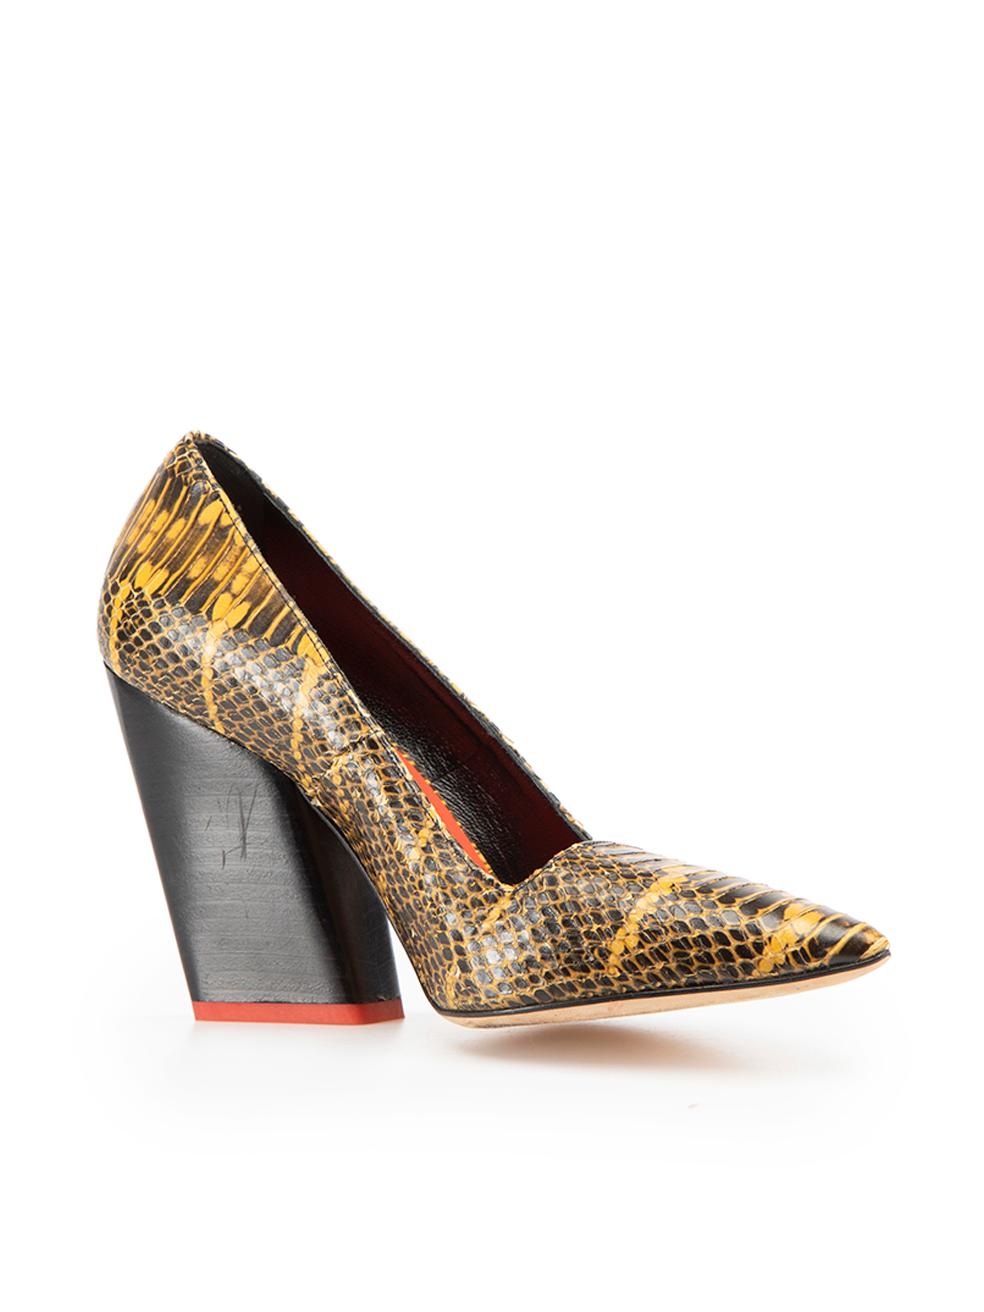 CONDITION is Very good. Minimal wear to shoes is evident. Minimal wear to the heels of both with faint scuff and scratch marks on this used Aeyde designer resale item.

Details
Brown
Python pumps
Heels
Point-toe
Made in Italy
Composition
EXTERIOR: